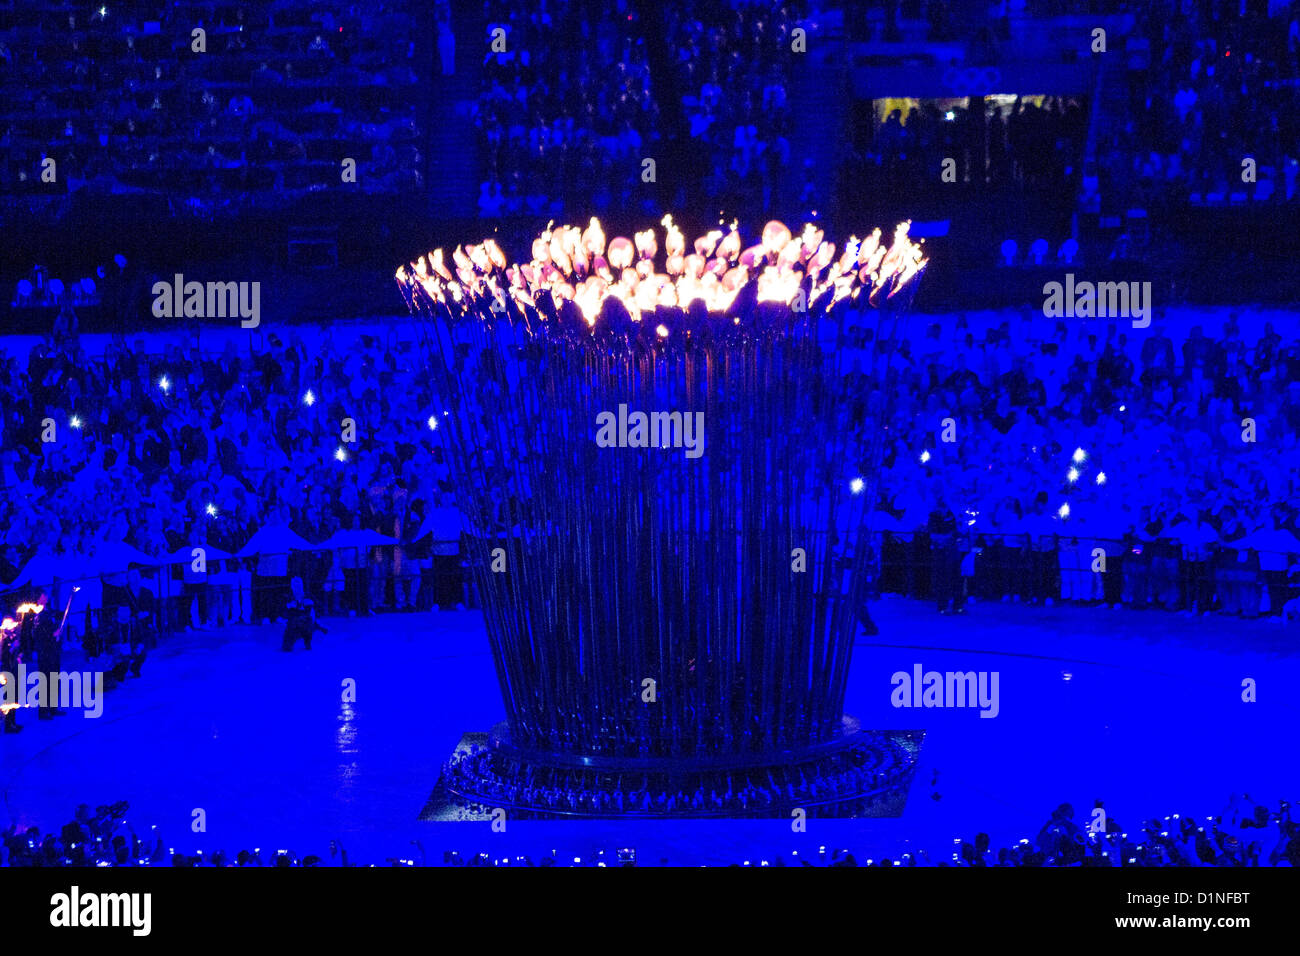 Olympic Flame at the Opening Ceremonies, Olympics London 2012 Stock Photo